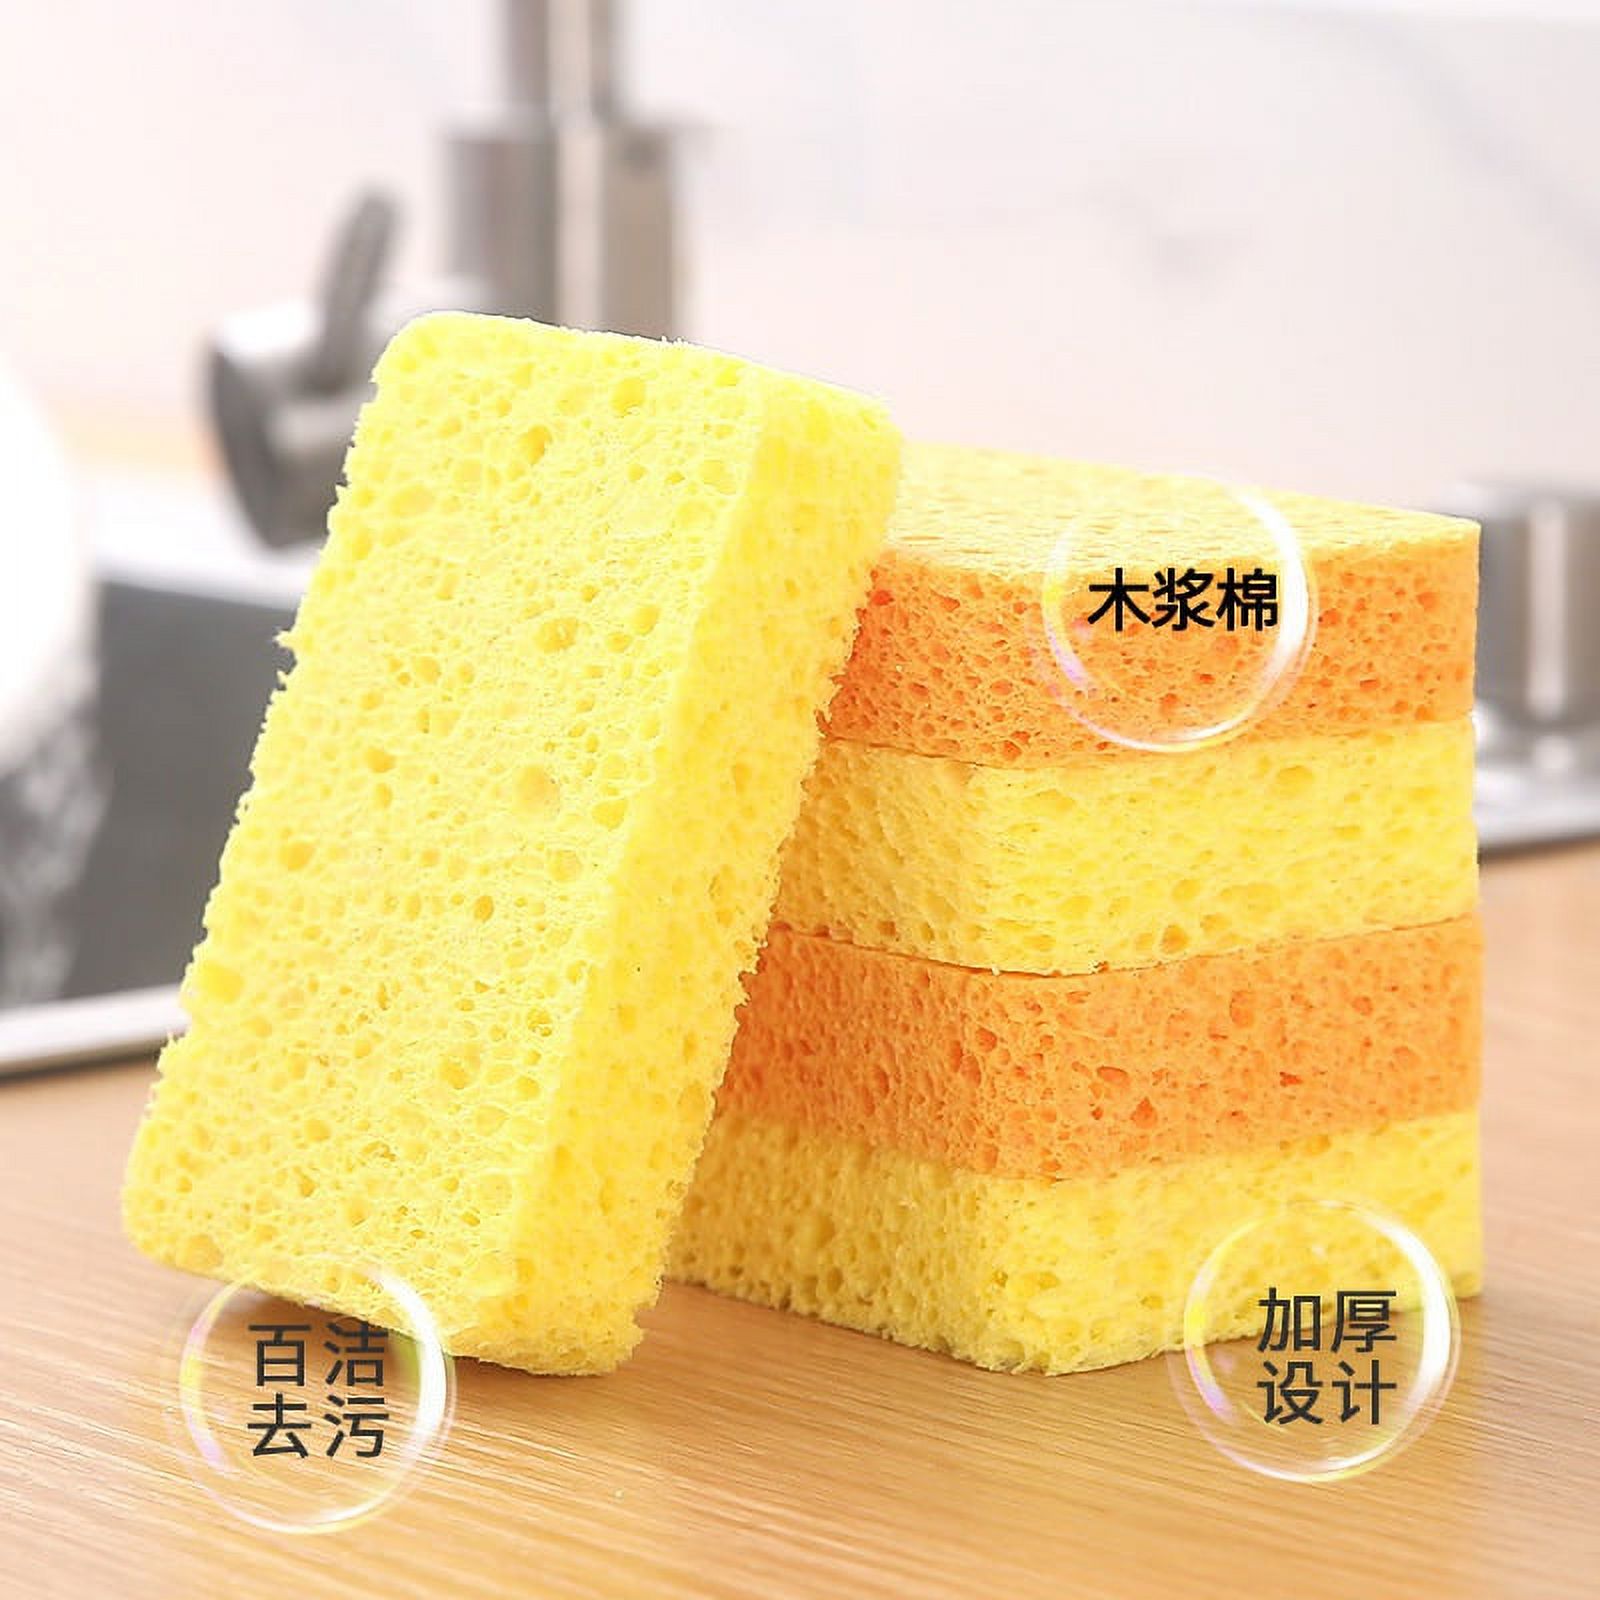 FYCONE Sponges for Dishes, Large Cellulose Kitchen Sponge, Thick